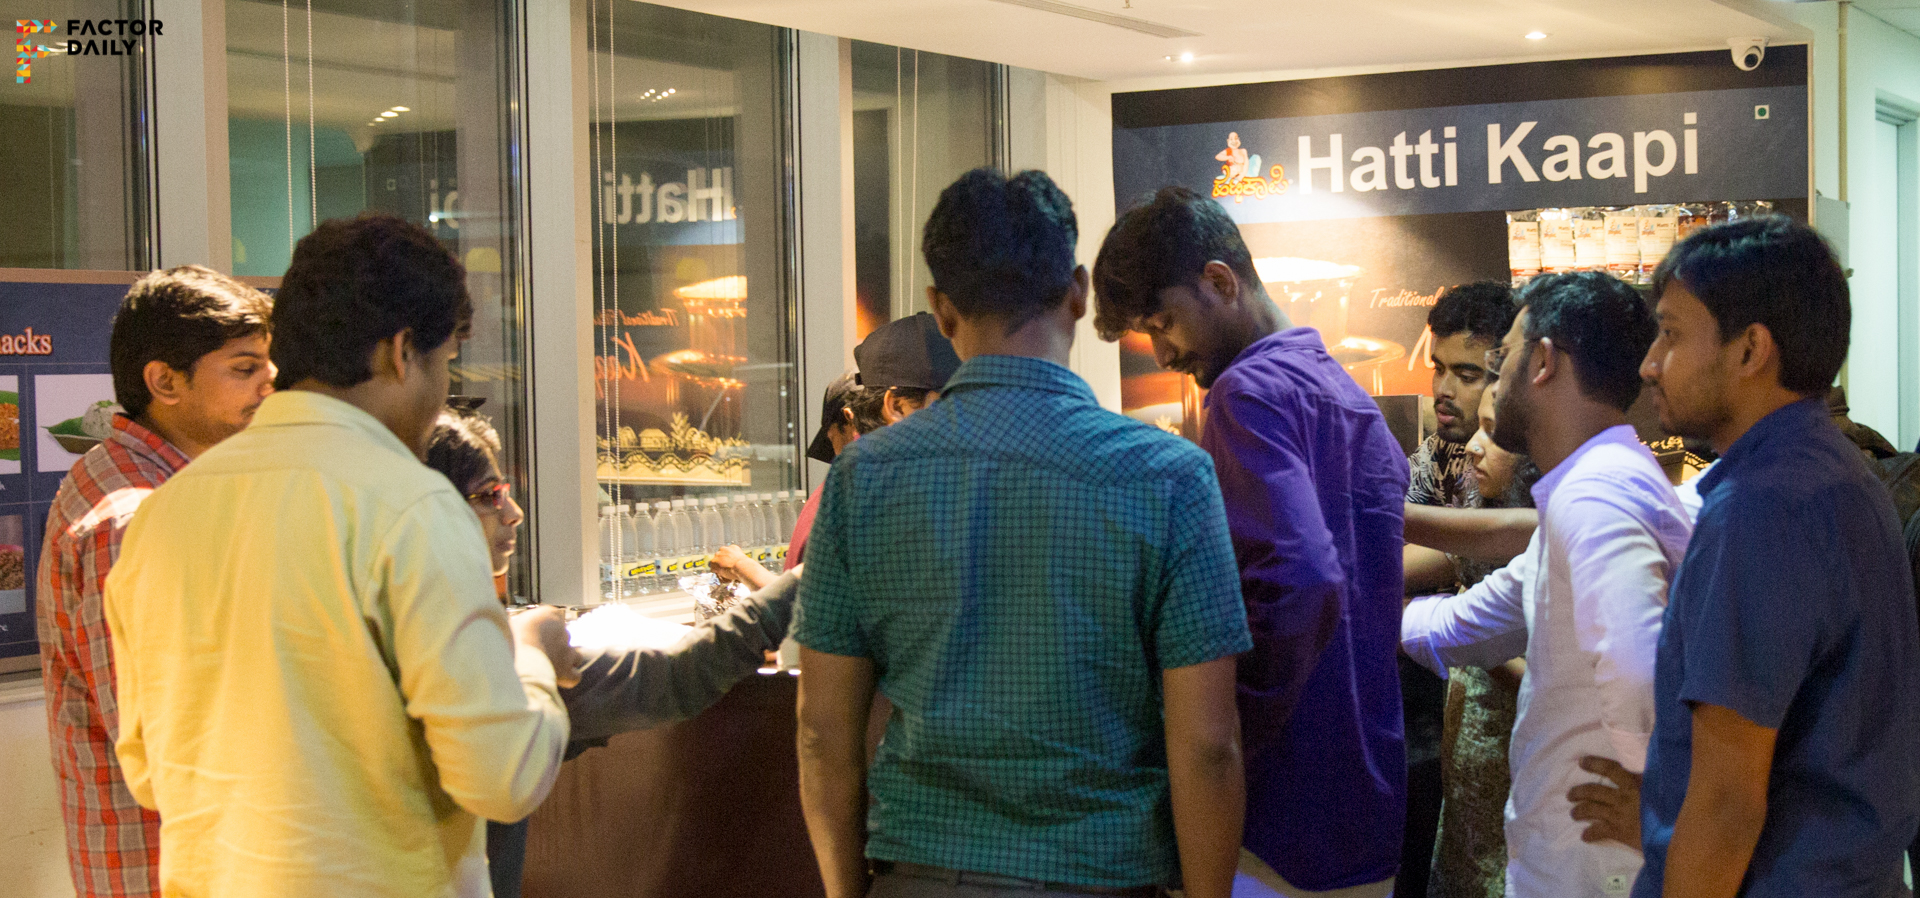 The filter coffee shop inside Flipkart's canteen on the ground floor is doing brisk business in the wee hours of Sunday. Photo: Rajesh Subramanian. Location: Bangalore.